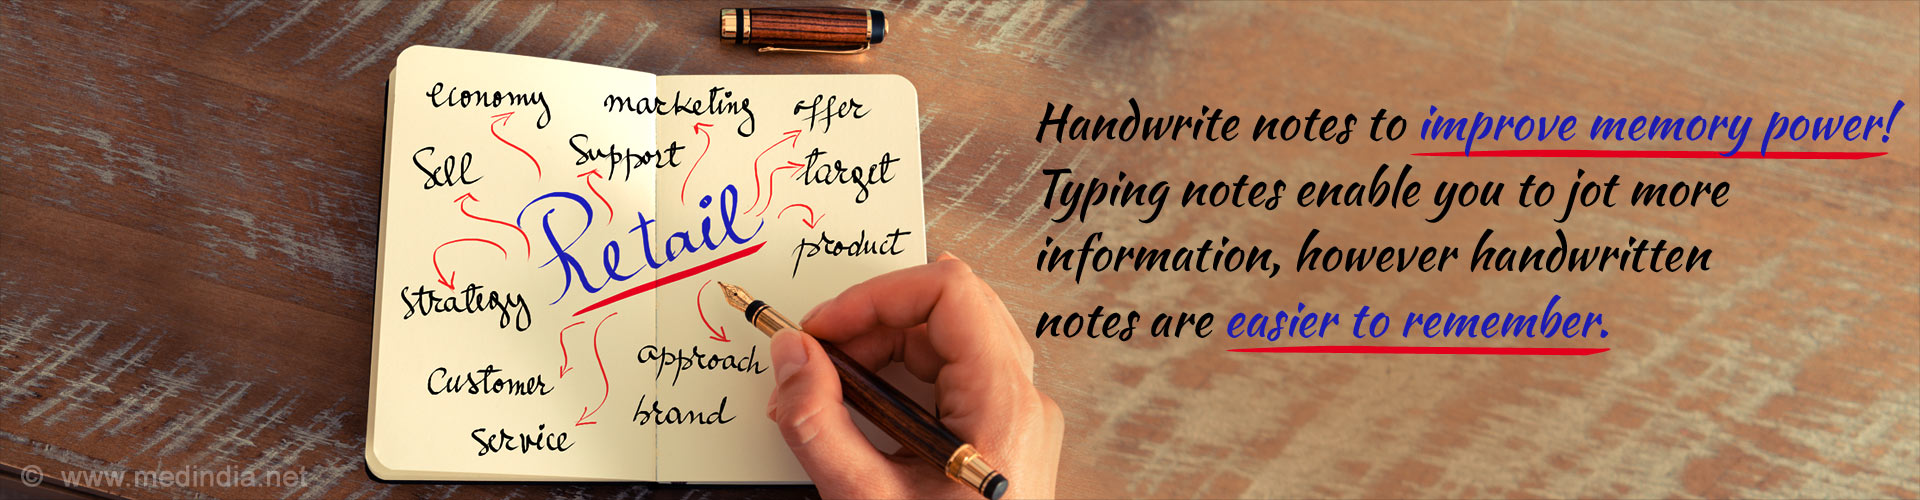 Handwrite notes to improve memory power! Typing notes enable you to jot more information, however handwritten notes are easier to remember.